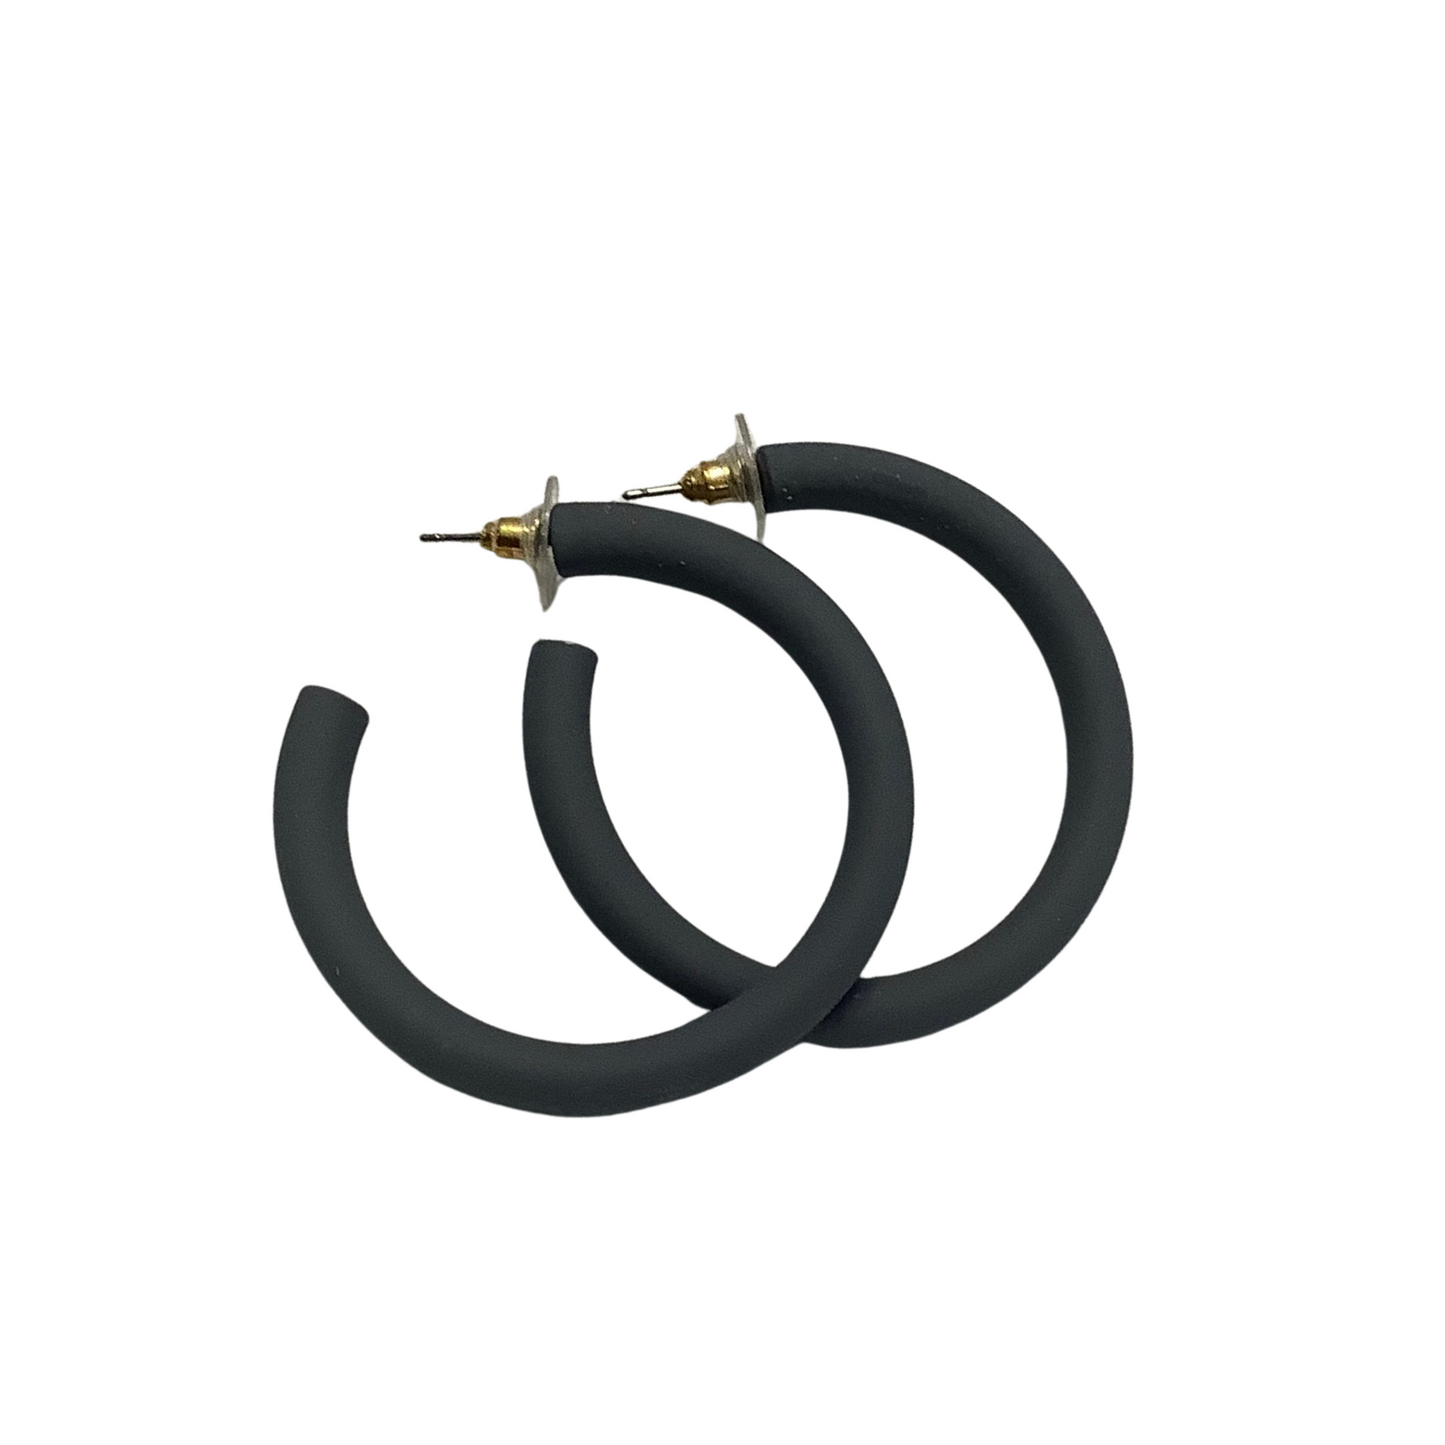 These Metal Hoops offer a lightweight design that comes in a beautiful grey color, allowing you to add a dash of sophistication to your look. Each hoop is made with colored metal that will look great with any outfit.